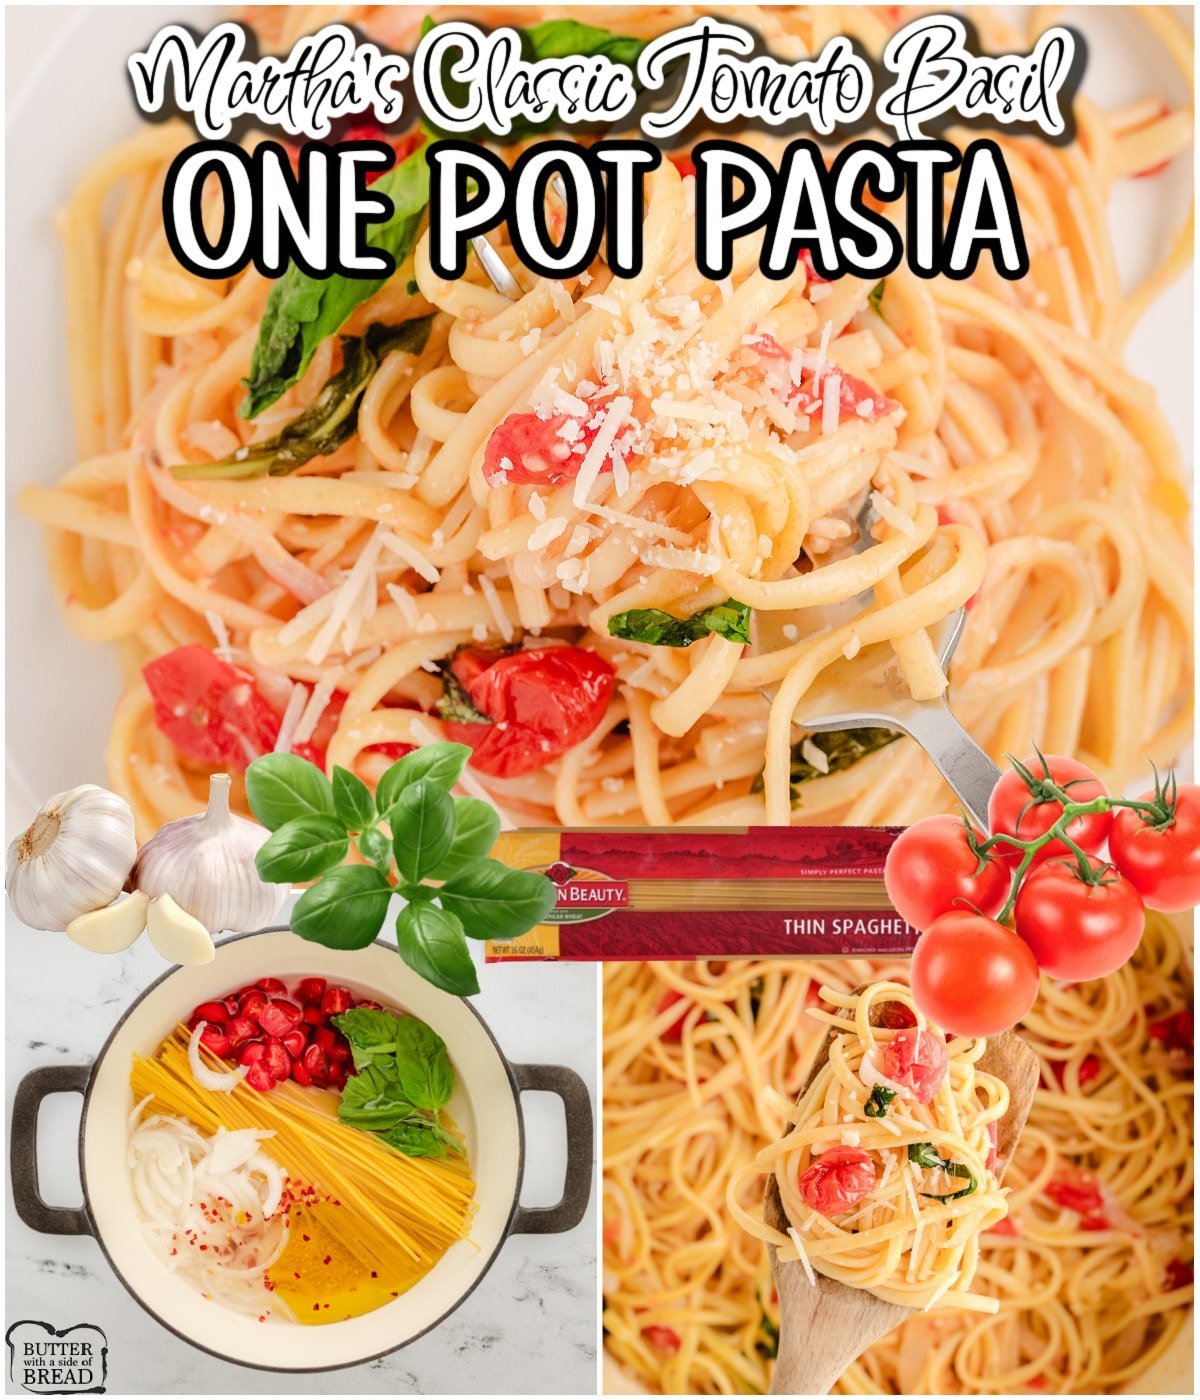 Martha's One Pot Pasta is a super simple, delicious tomato basil pasta that you'll absolutely love! Fresh, flavorful ingredients all tossed in a pot and cooked in minutes!